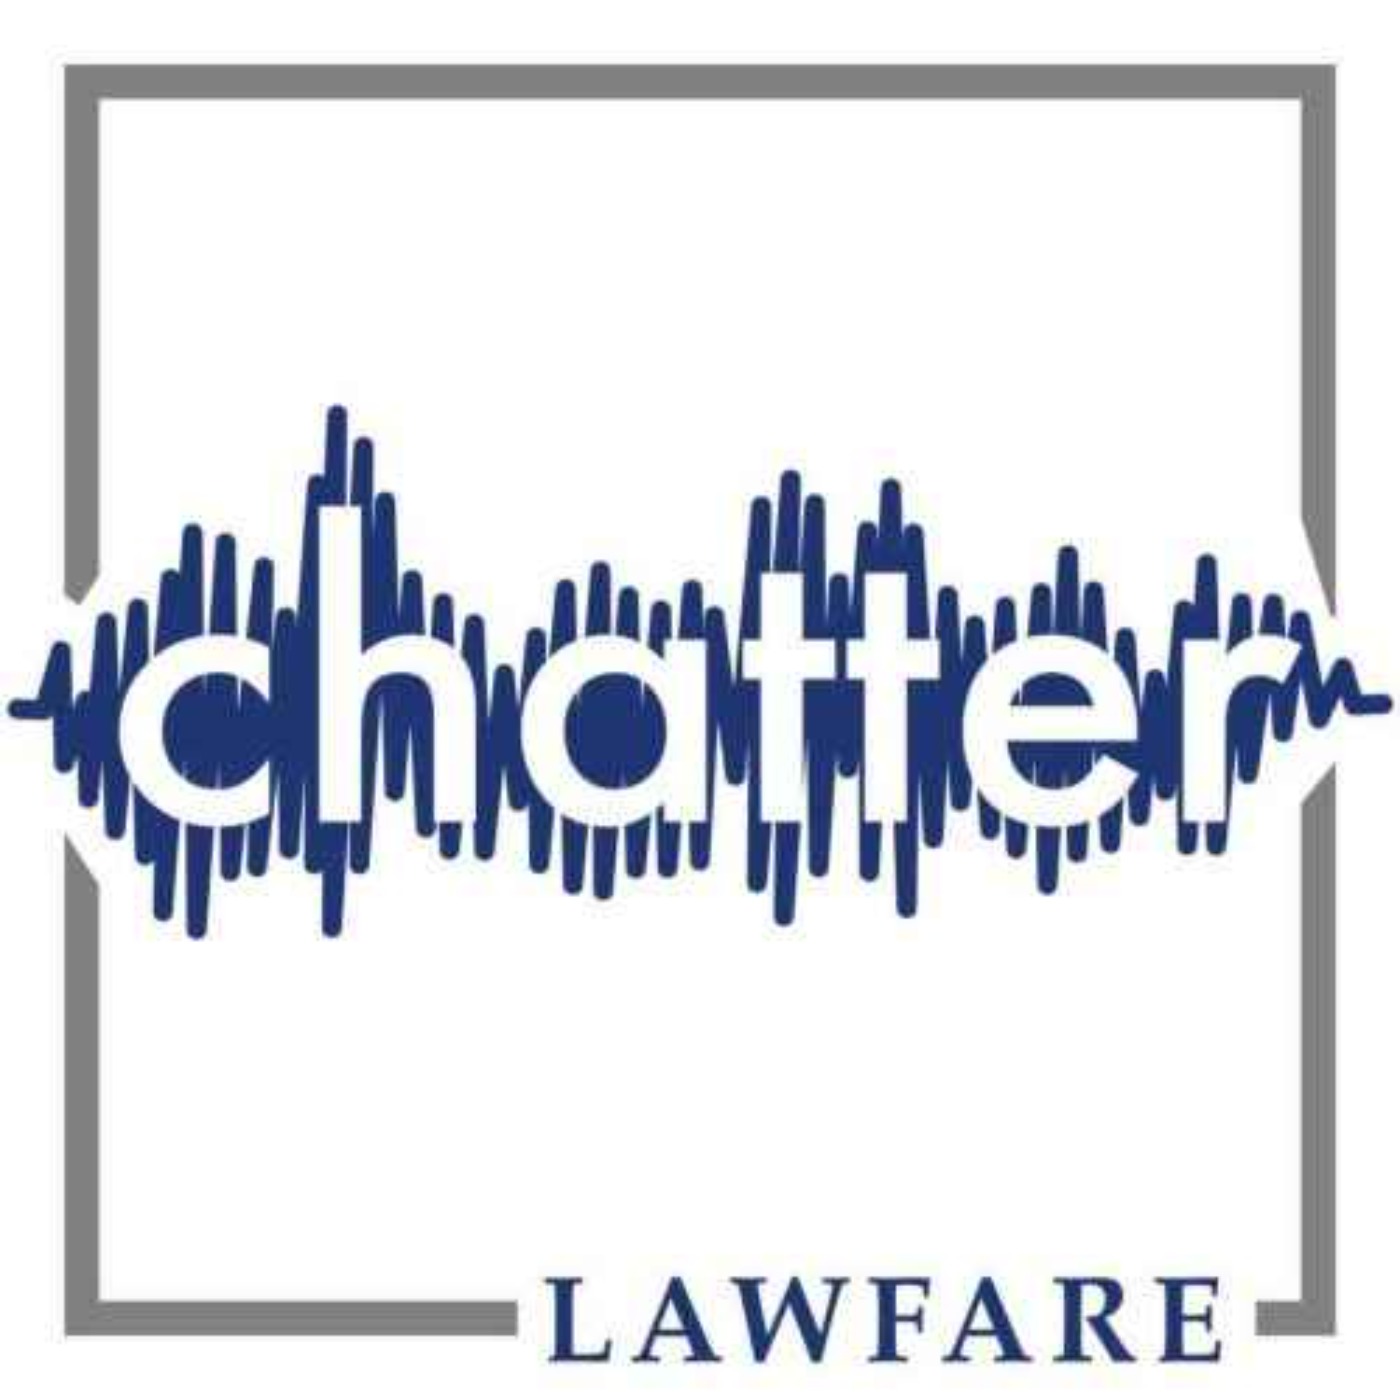 Chatter: Fabric, Dyes, Glamour, and International Affairs, with Virginia Postrel